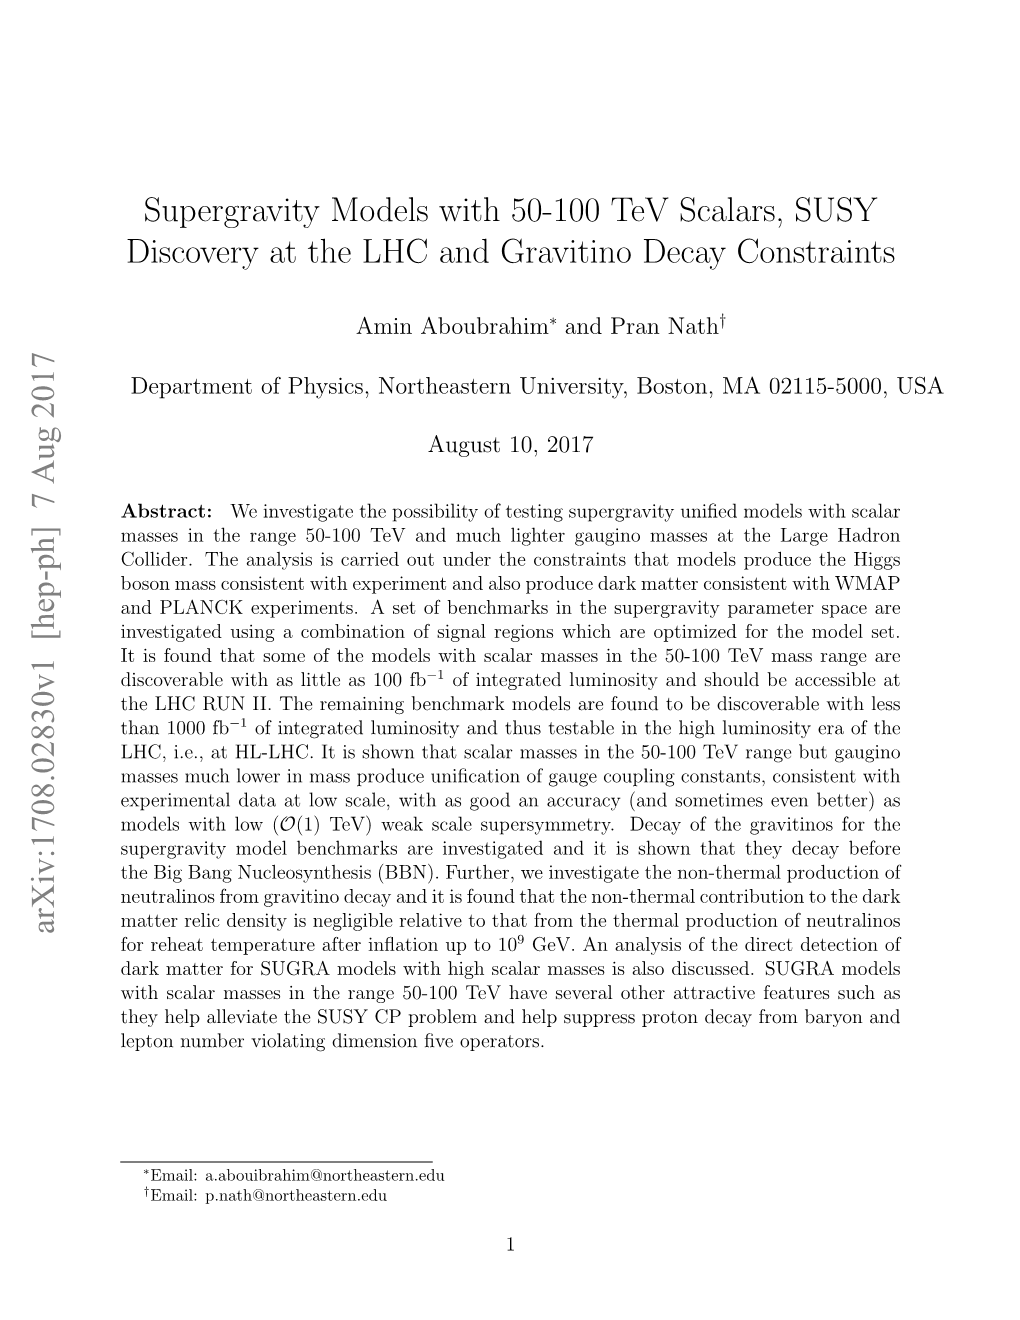 Supergravity Models with 50-100 Tev Scalars, SUSY Discovery at the LHC and Gravitino Decay Constraints